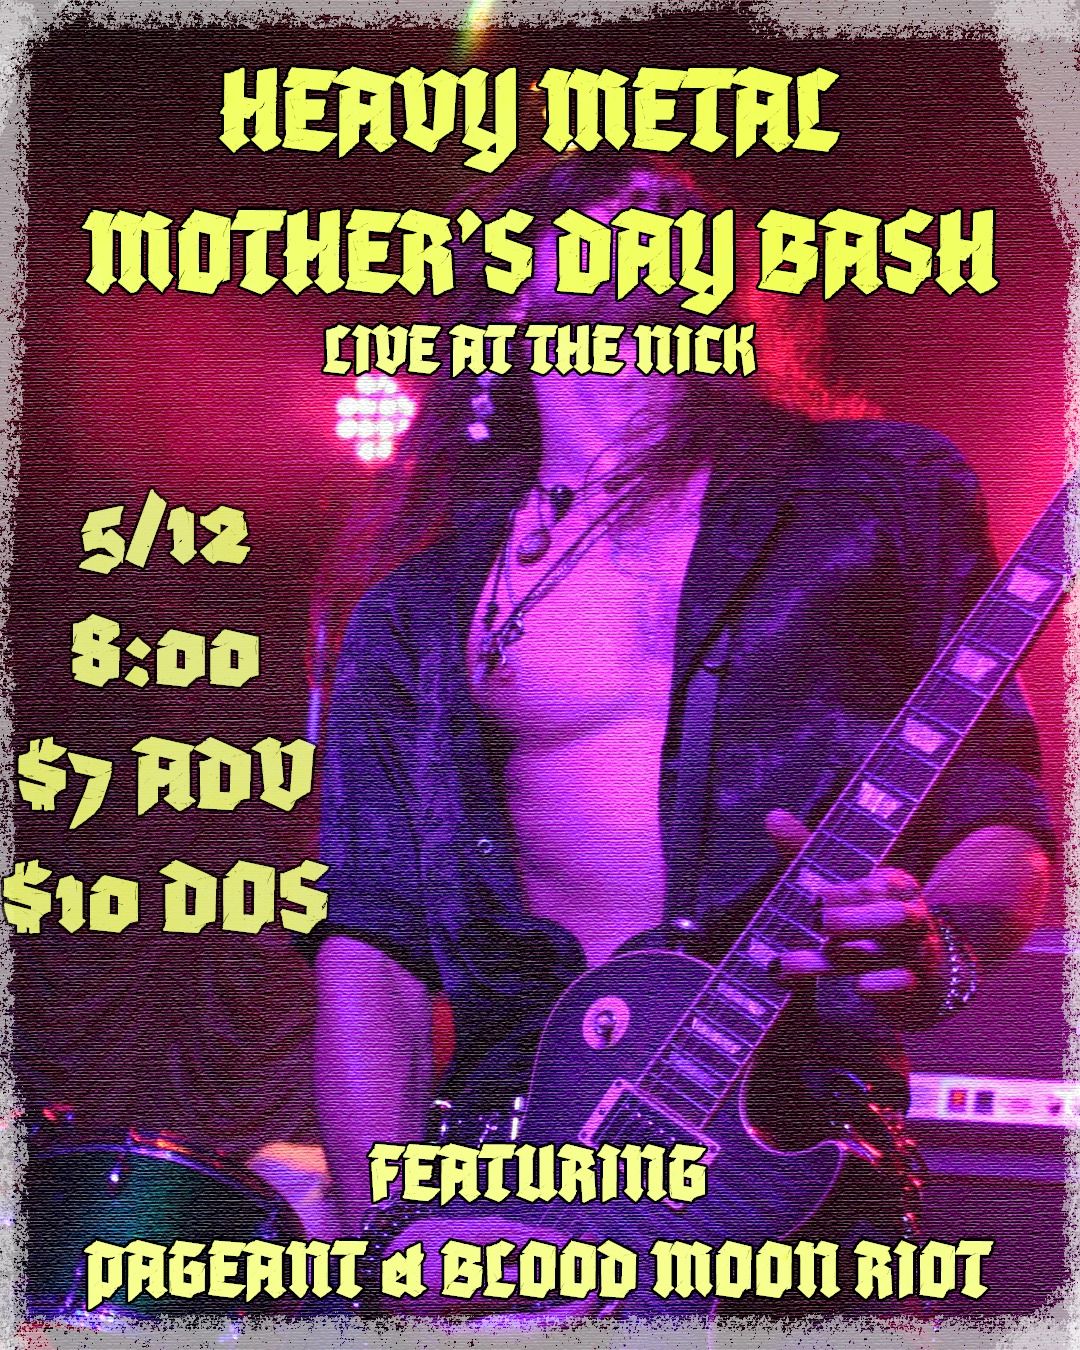 HEAVY METAL MOTHER'S DAY BASH AT THE NICK - Featuring Pageant & Blood Moon Riot